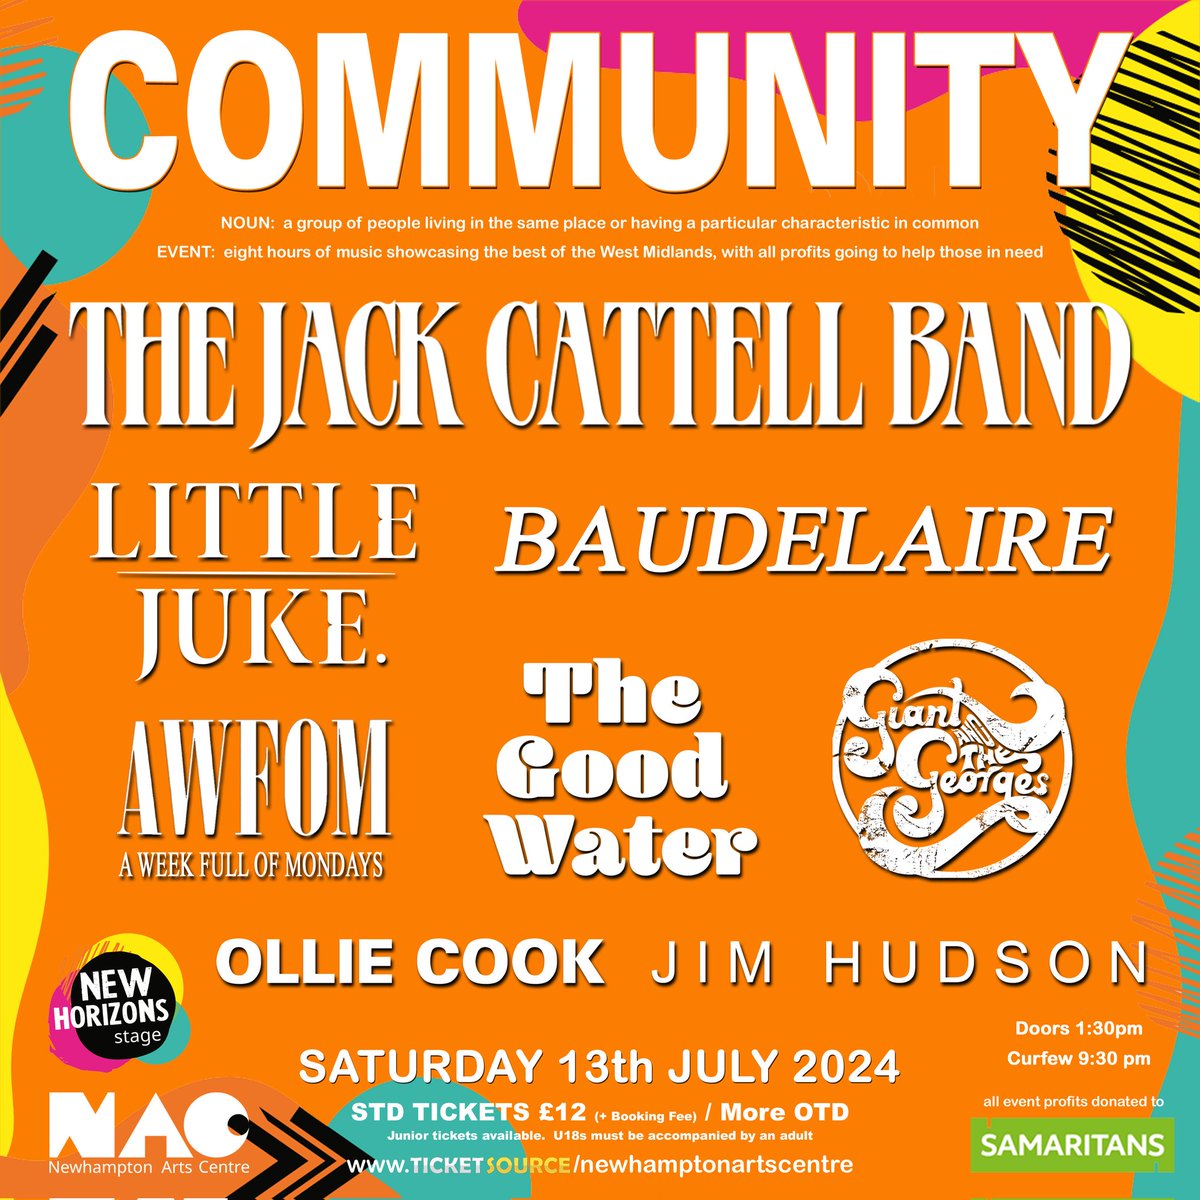 If you listened to last night's show, you'll know already but here are your members of the Community @Newhampton on Sat 13th July. @jackcattellband @BaudelaireUk @awfomondays @littlejukemusic @jimhudsonmusic ollie cook @thegoodwater @GiantGeorges newhamptonarts.co.uk/events/communi…